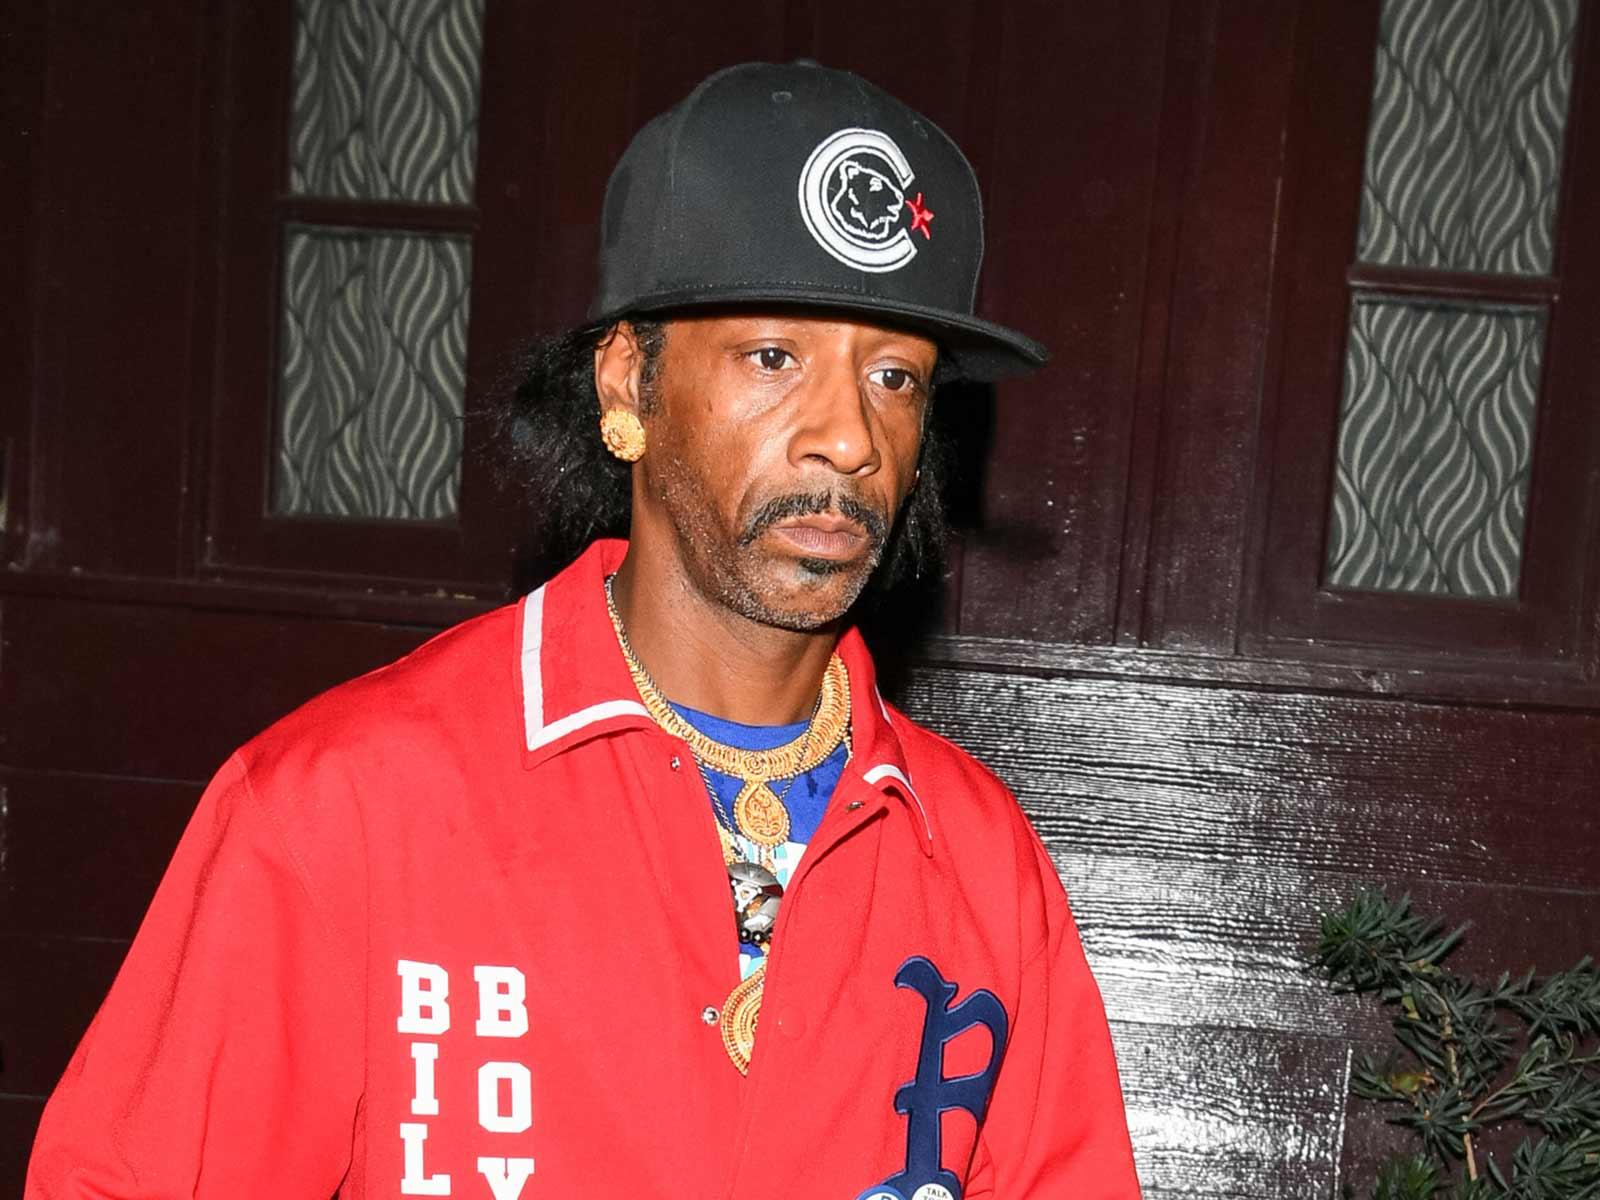 Katt Williams’ Alleged Ex Asks for $2.5 Million a Month in Support